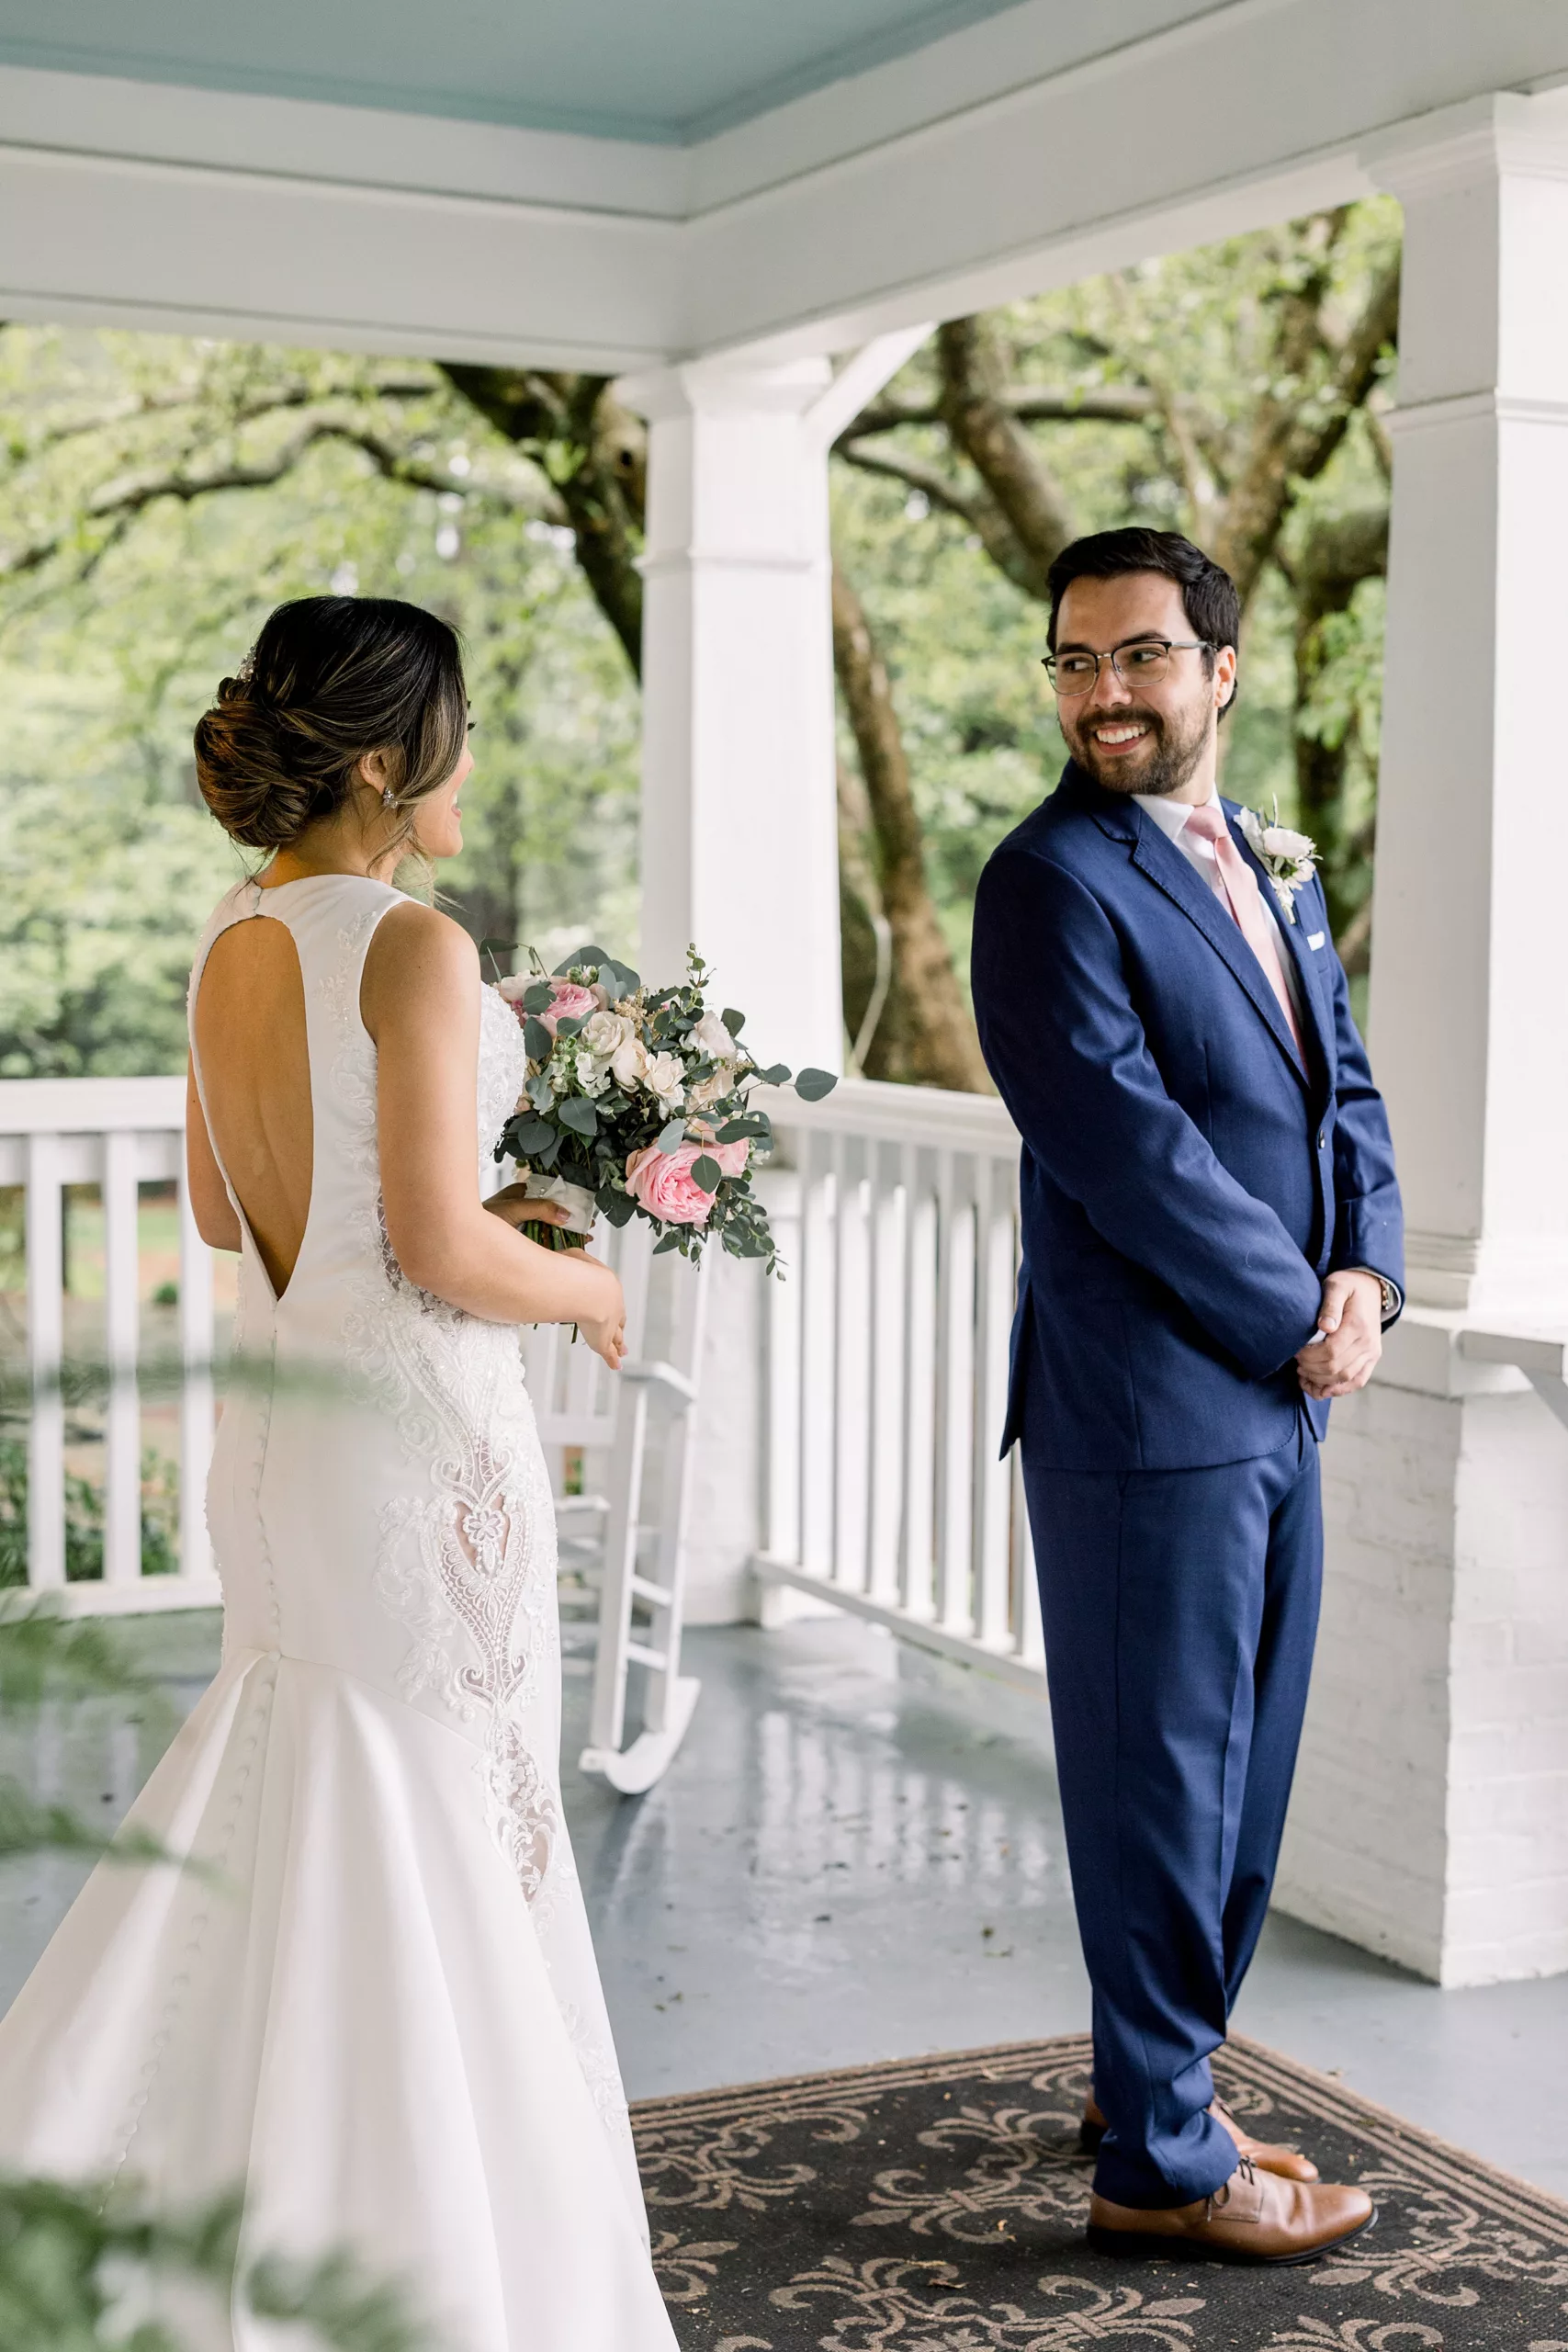 A groom turns around to see his bride in her dress for the first time during a first look wedding